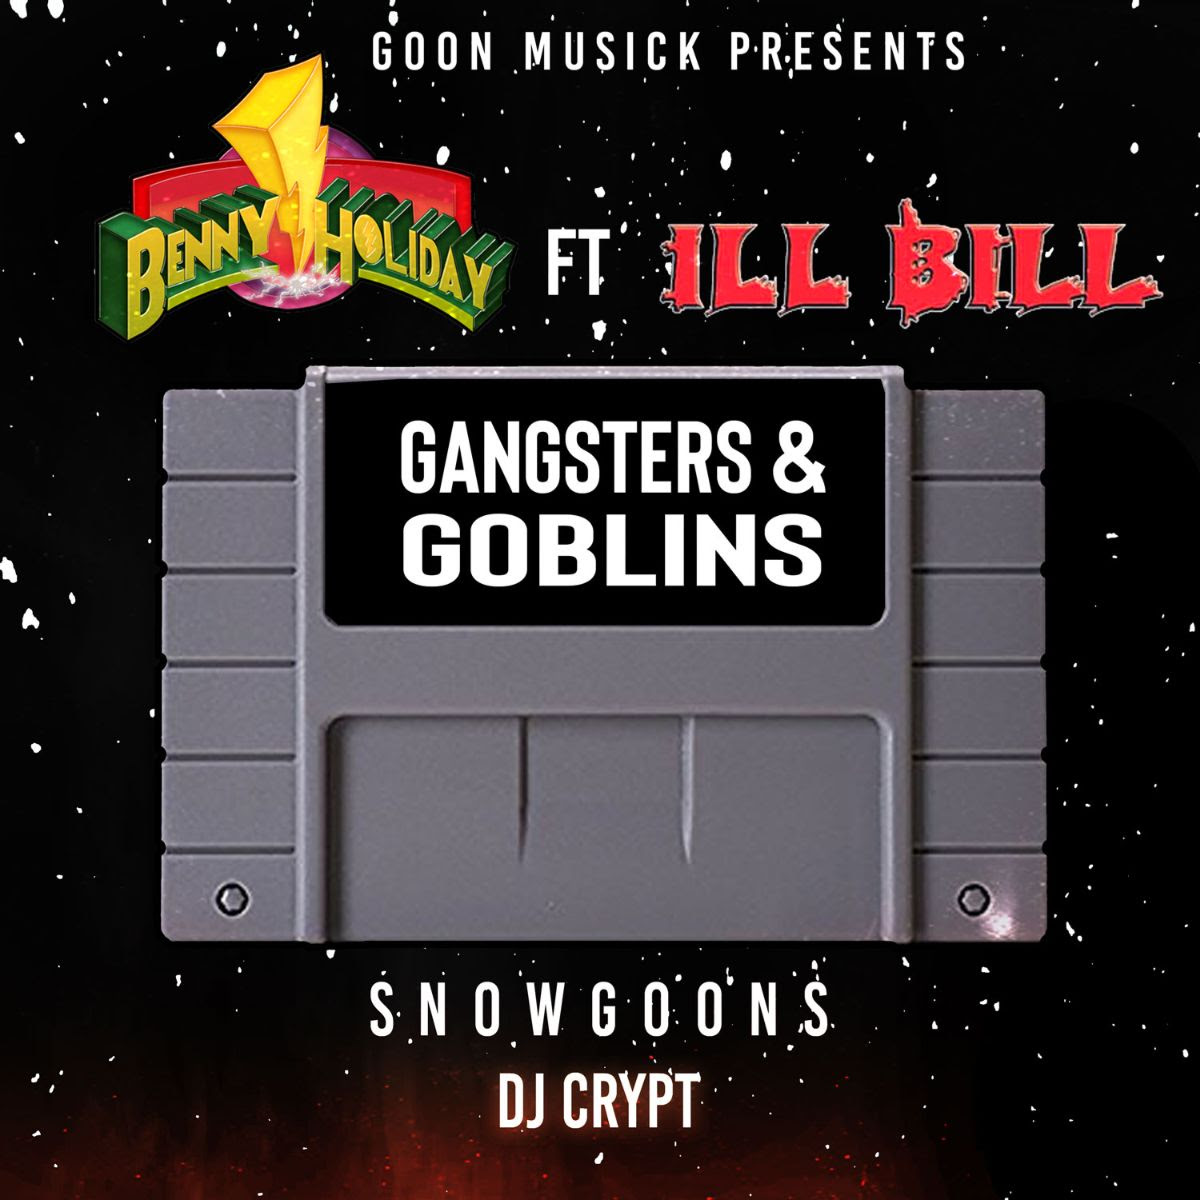 Benny Holiday ft. ILL BILL – Gangsters & Goblins